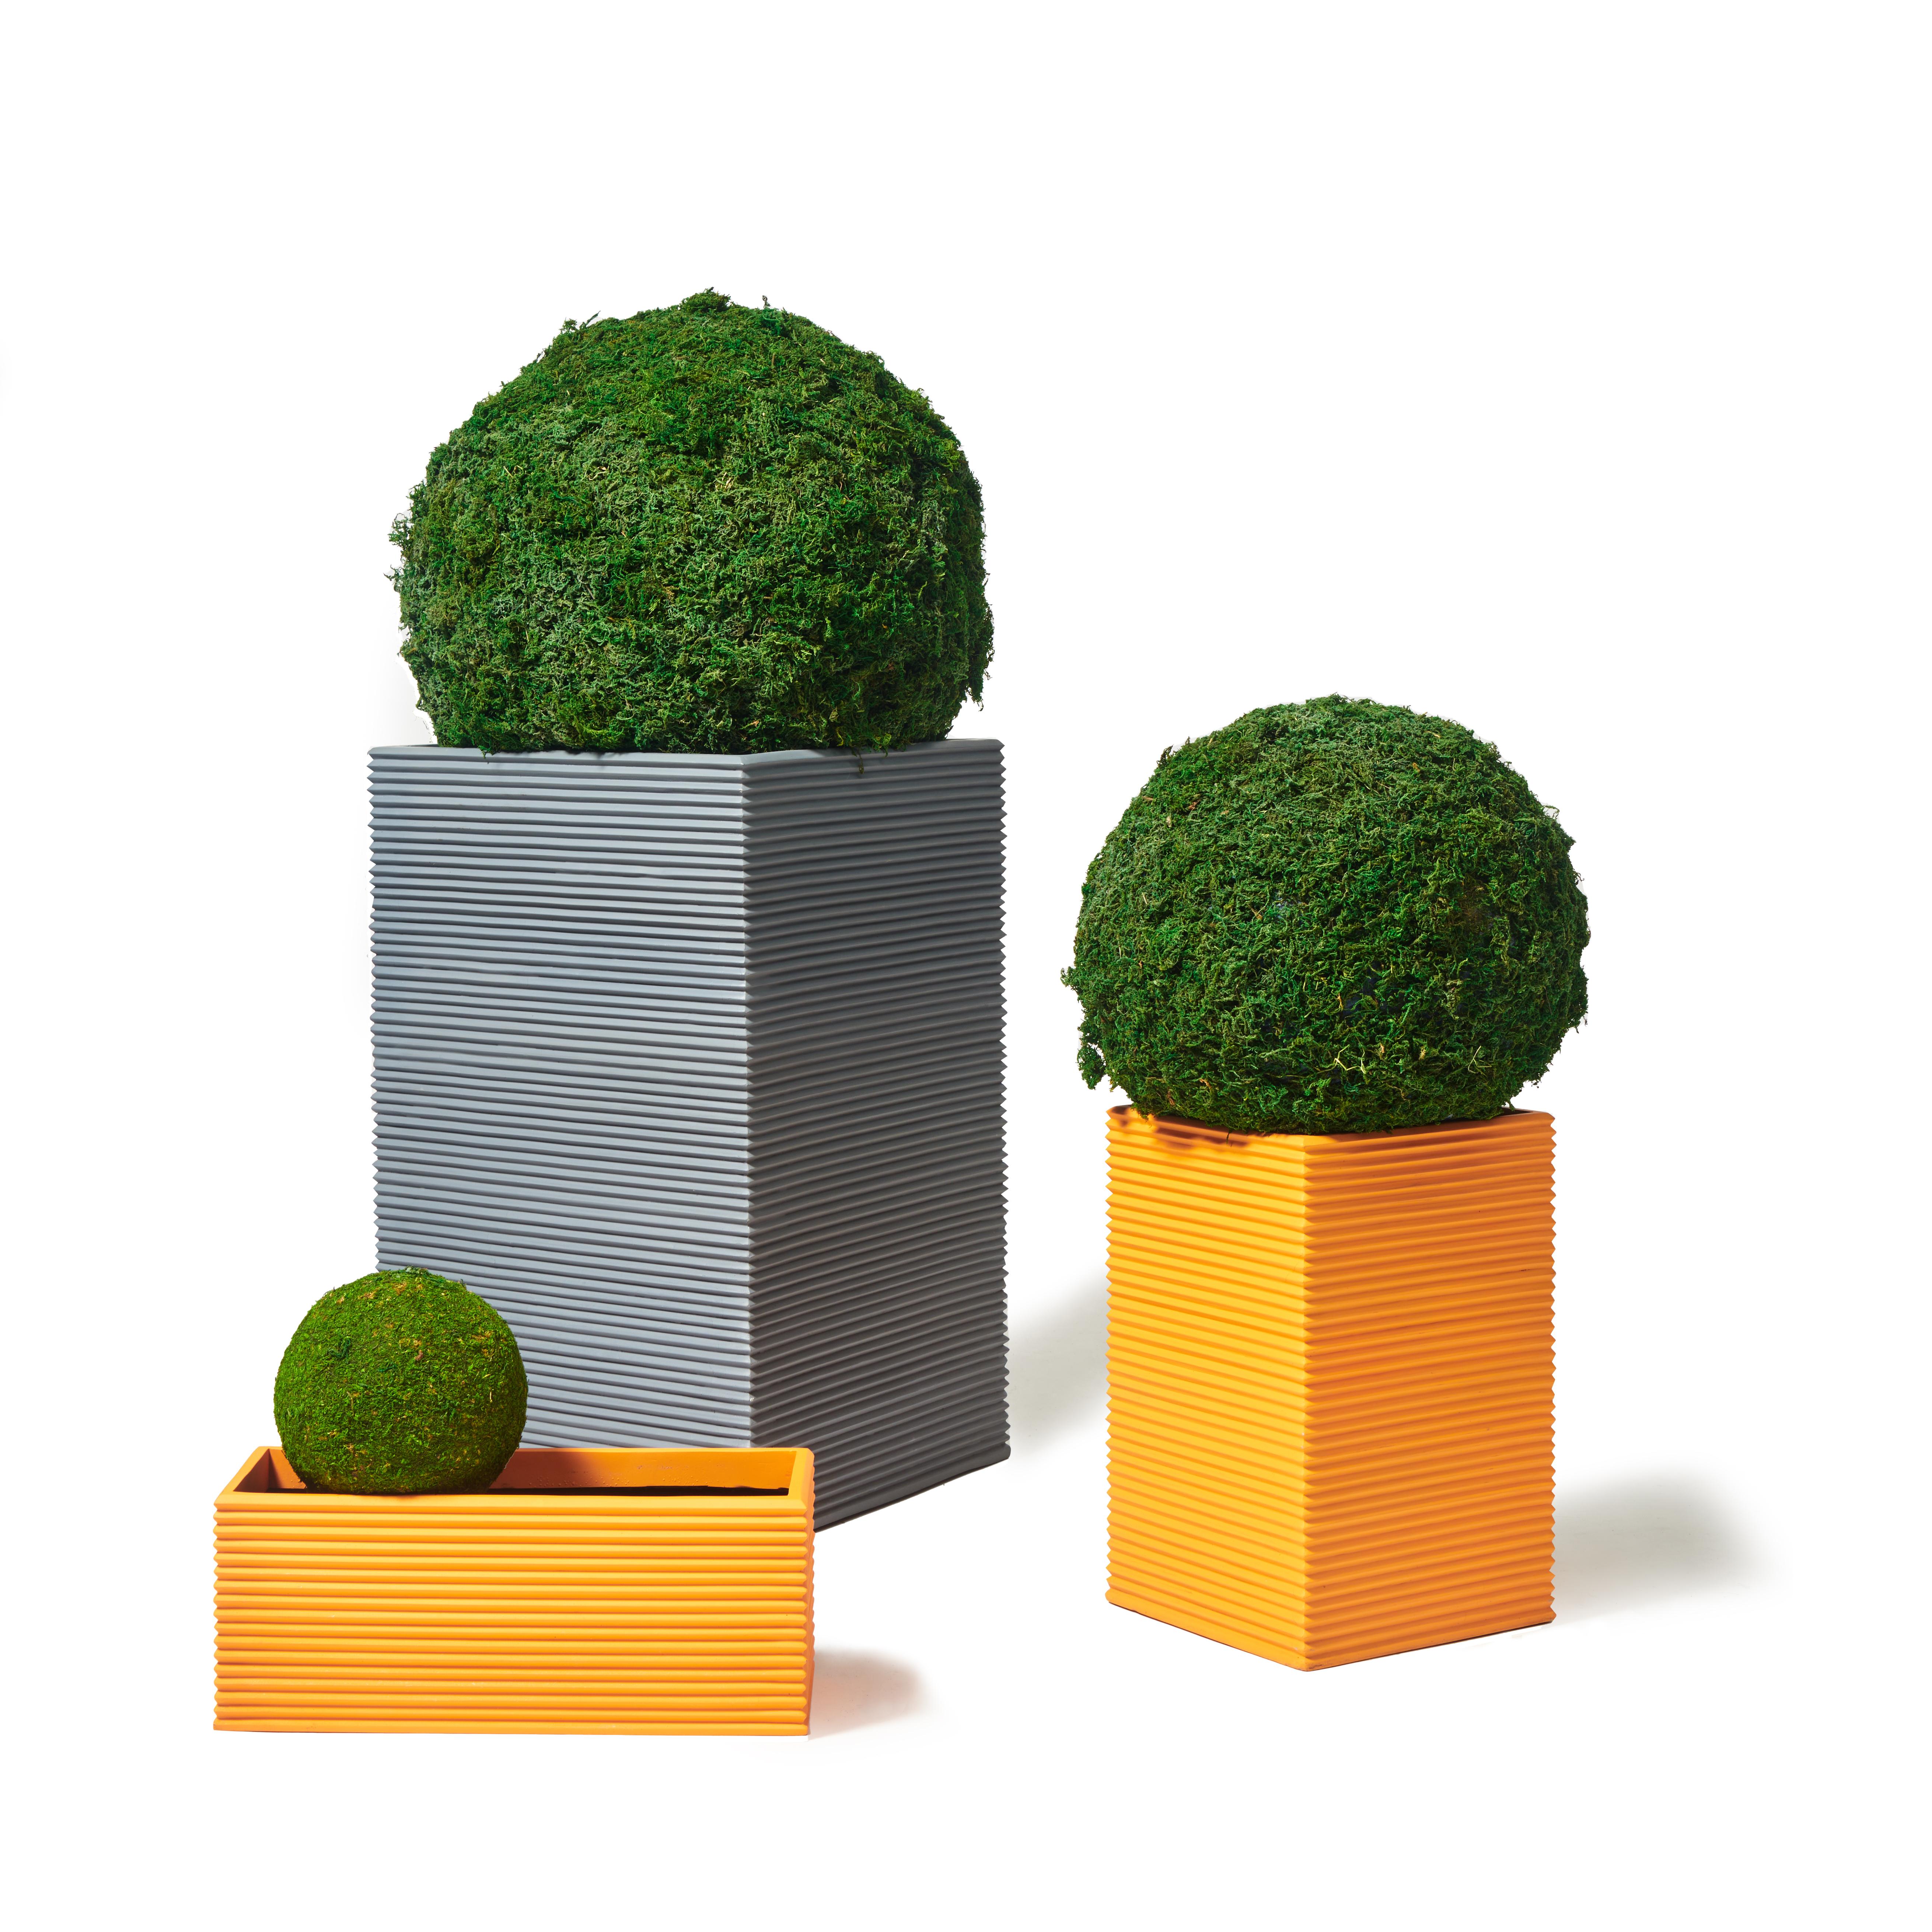 Mexican Oversize Tall Rectangular Planter 'Orange' by TFM, Rep by Tuleste Factory